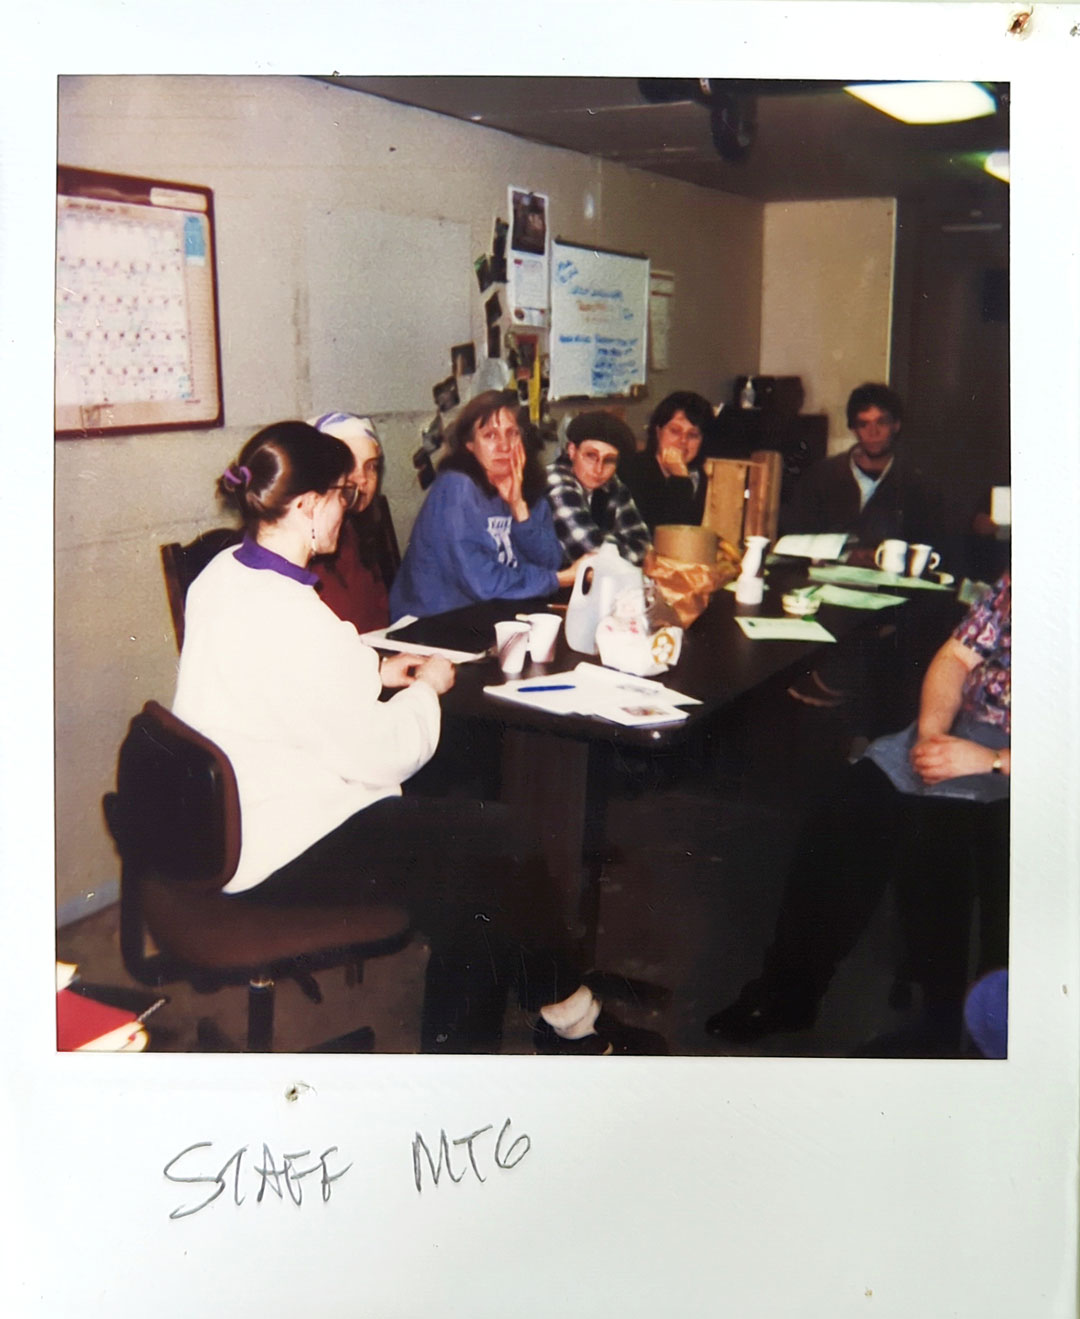 A group of six people is seated around a table in a small room for a meeting. Papers, a coffee maker, and cups are on the table. A handwritten note below the image reads "STAFF MTG." At Whole Foods Coop Duluth MN, a calendar and papers are pinned on a bulletin board in the background.